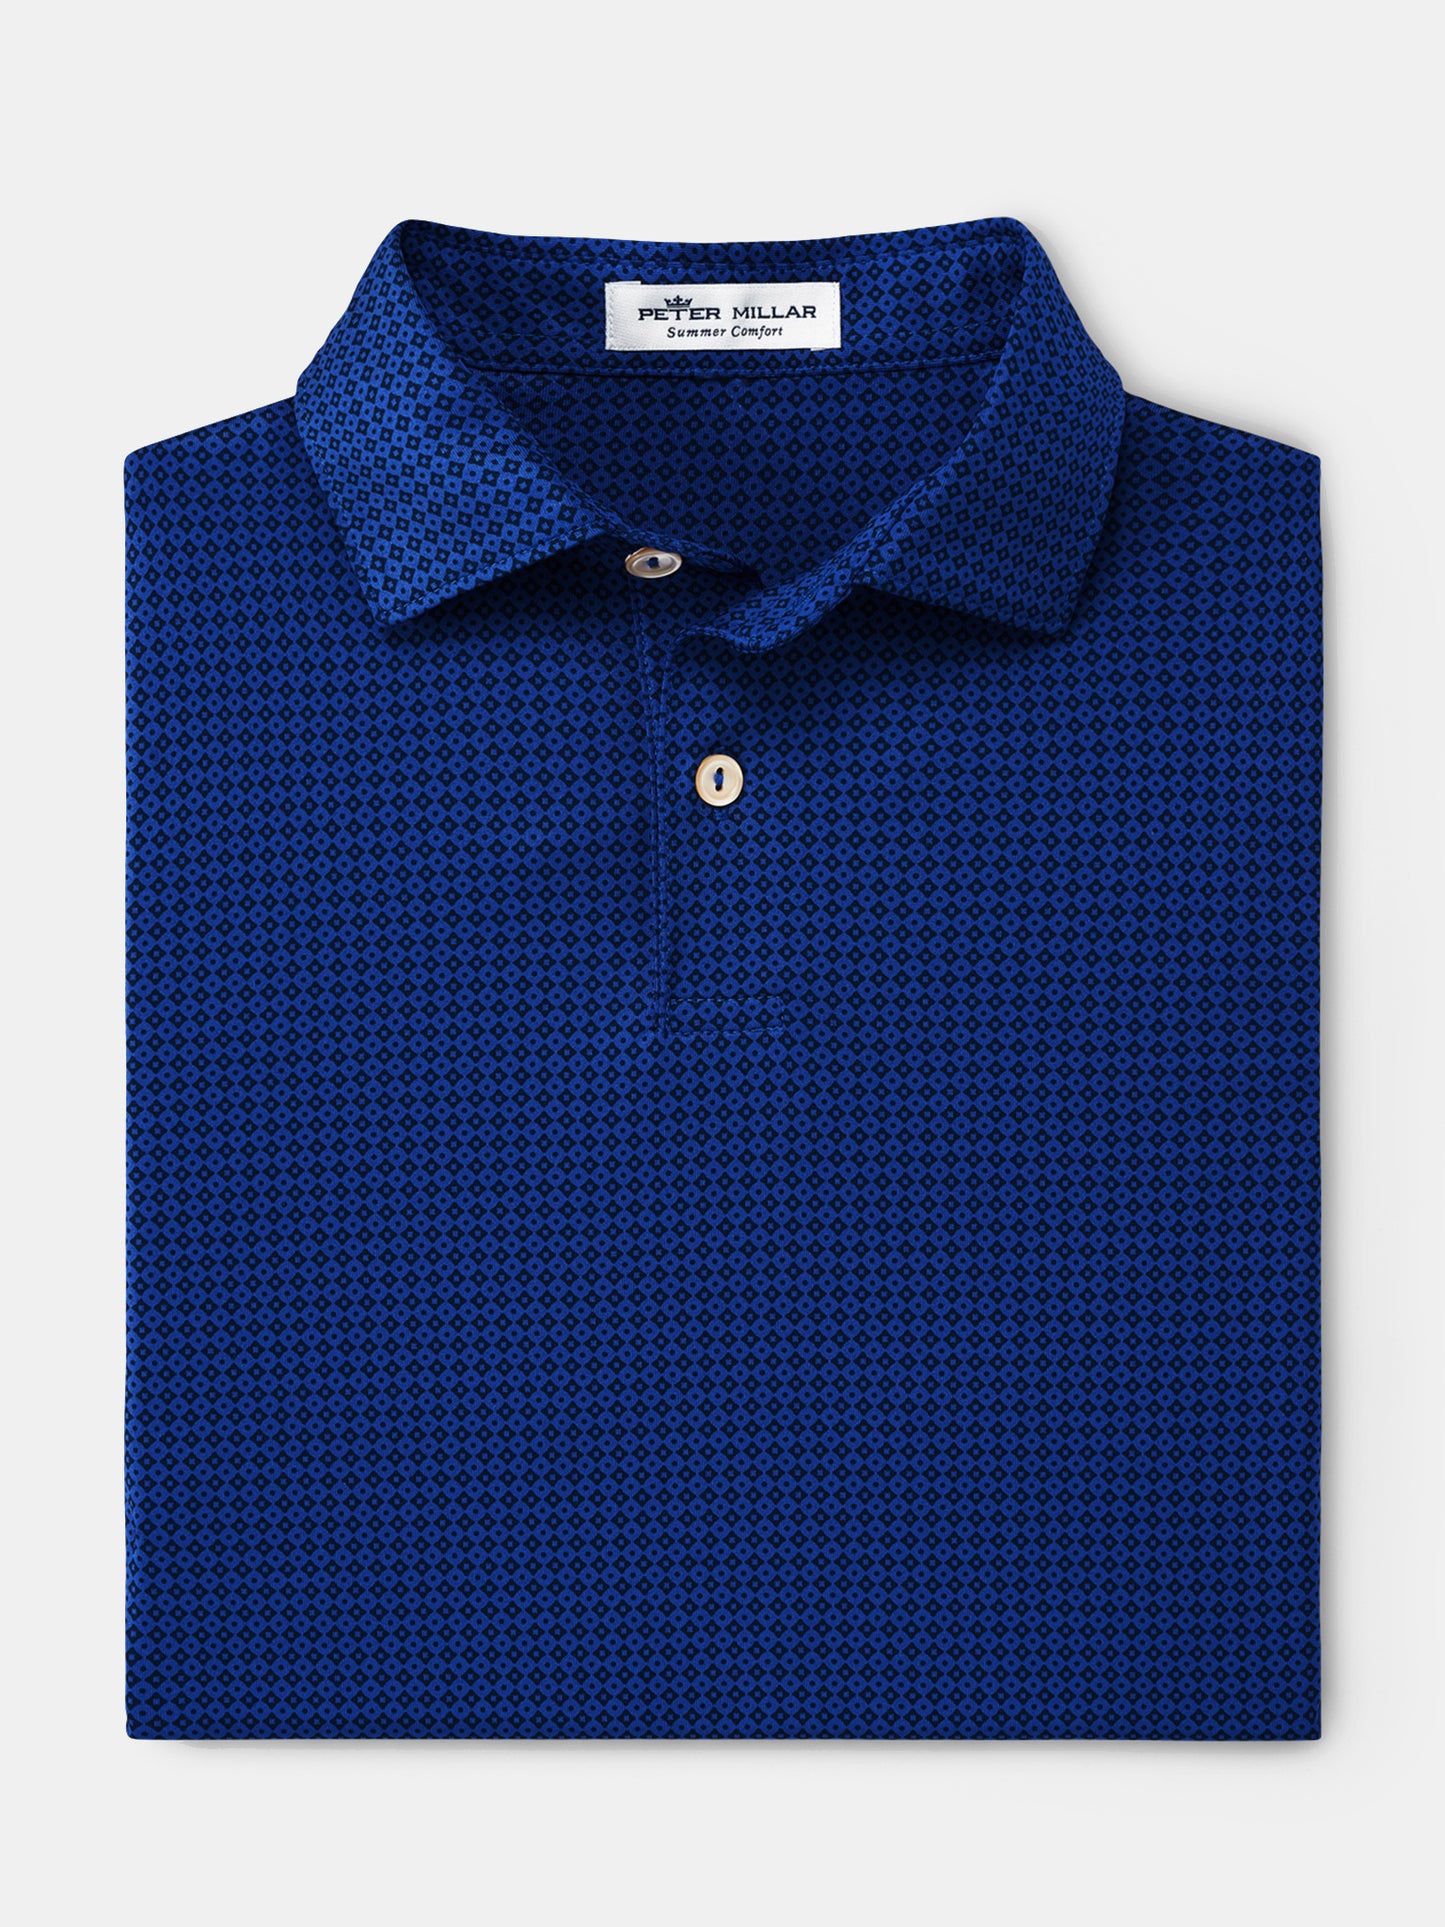 Peter Millar Youth Collection Boys' Duncan Performance Polo